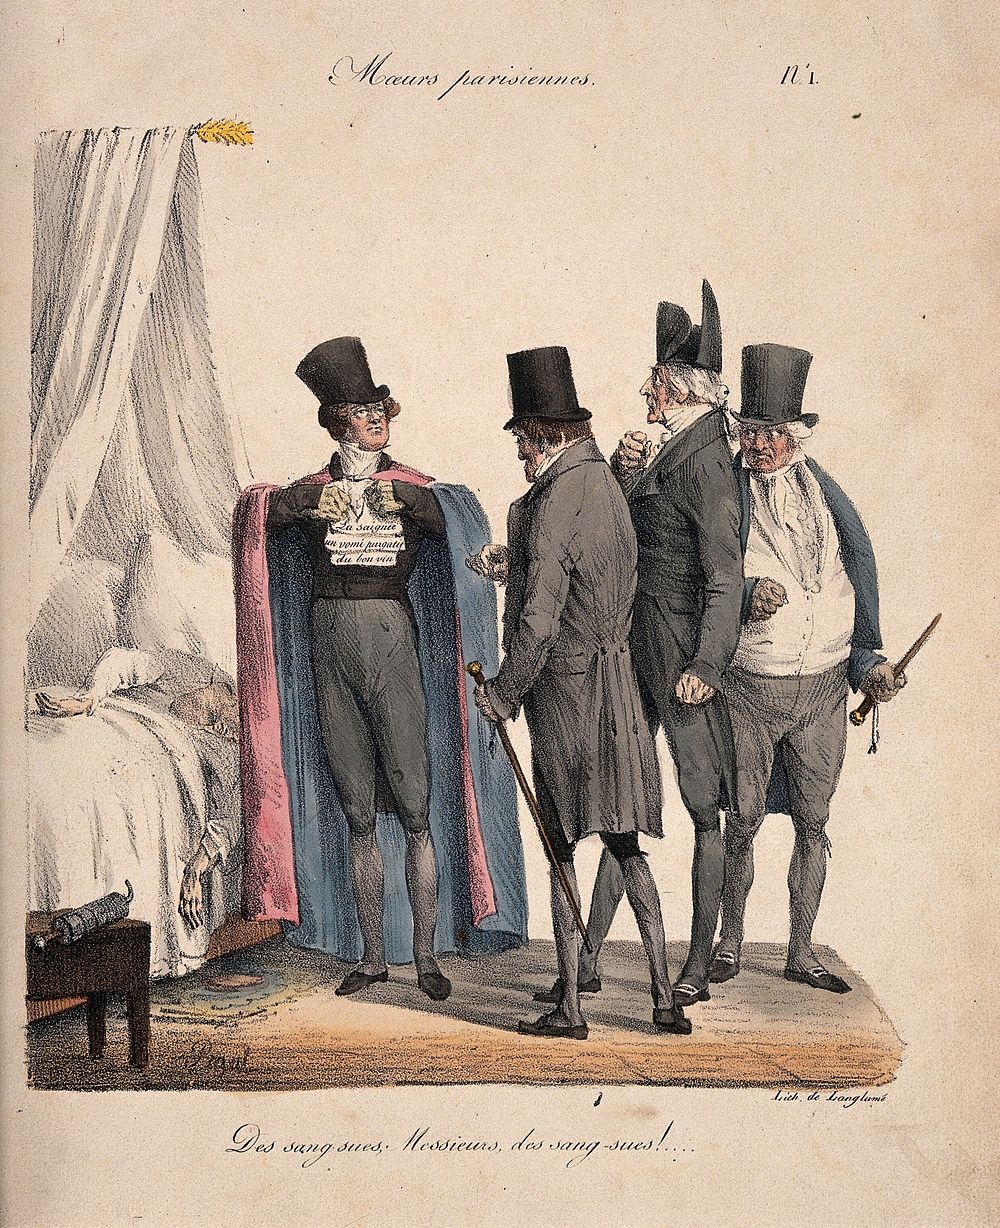 A group of fashionable physicians gathered around a sick patient listen to one of their number proclaiming the virtue of…